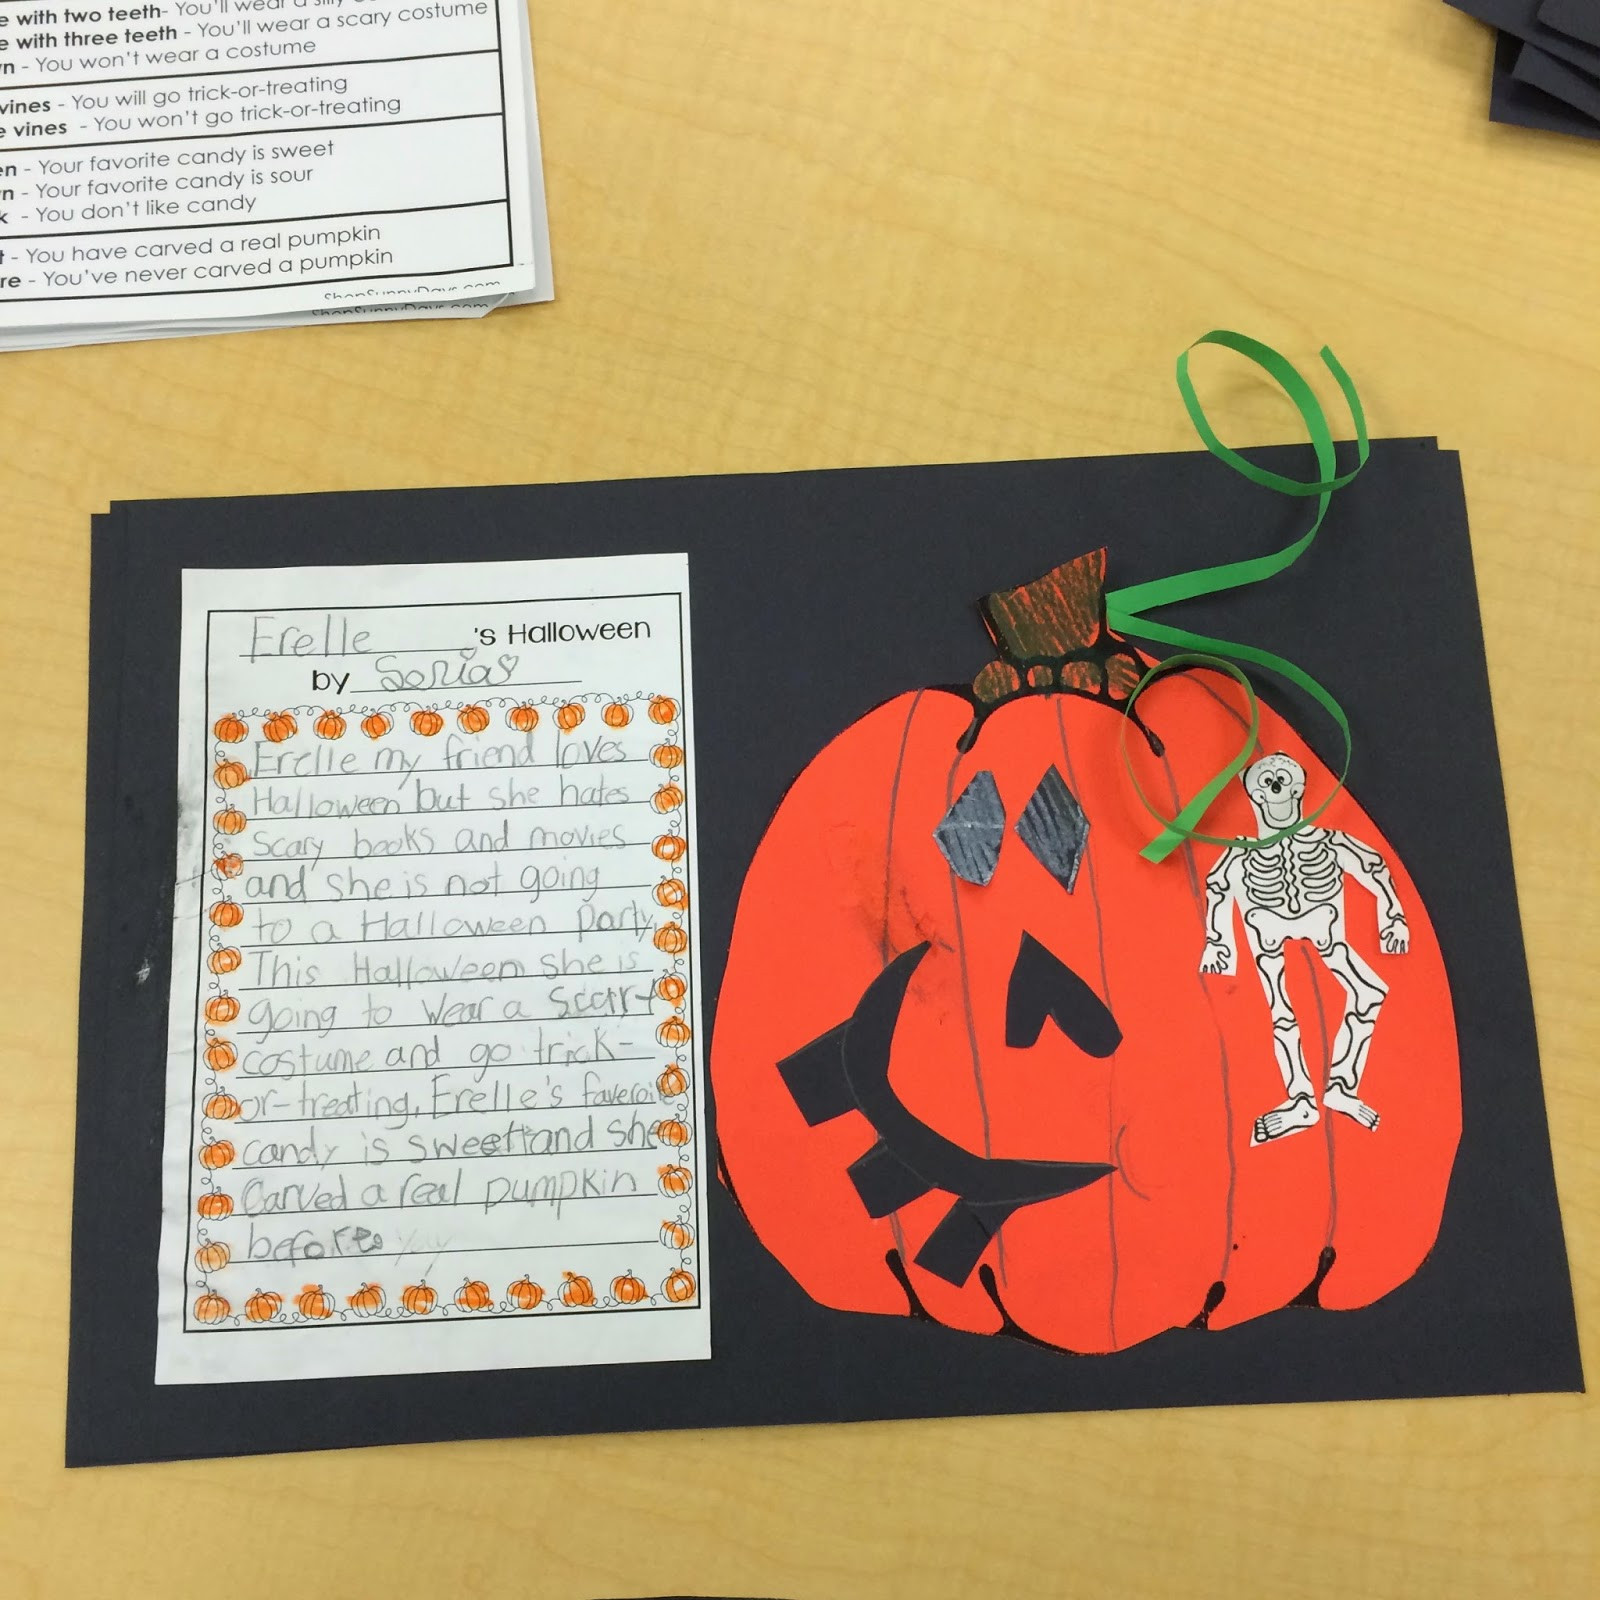 2Nd Grade Halloween Party Ideas
 Tardy to the Halloween Party updated freebie Sunny